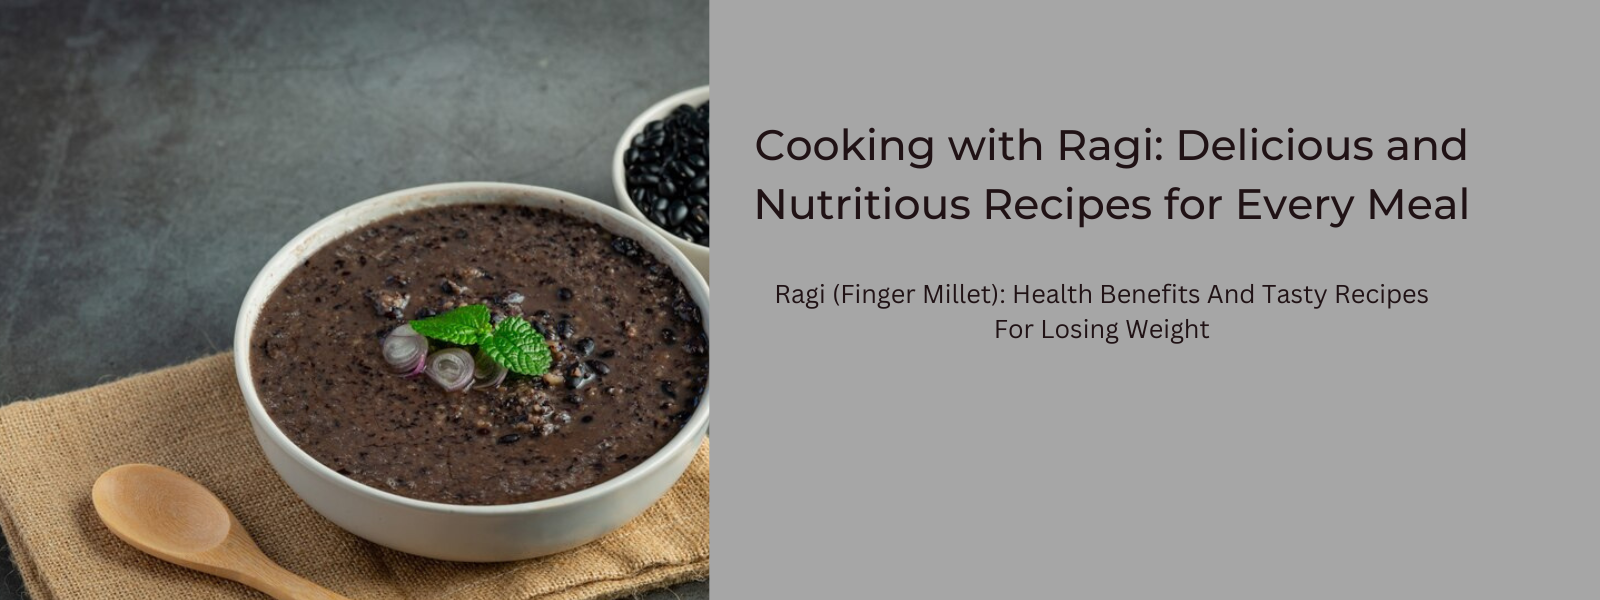 Cooking with Ragi: Delicious and Nutritious Recipes for Every Meal